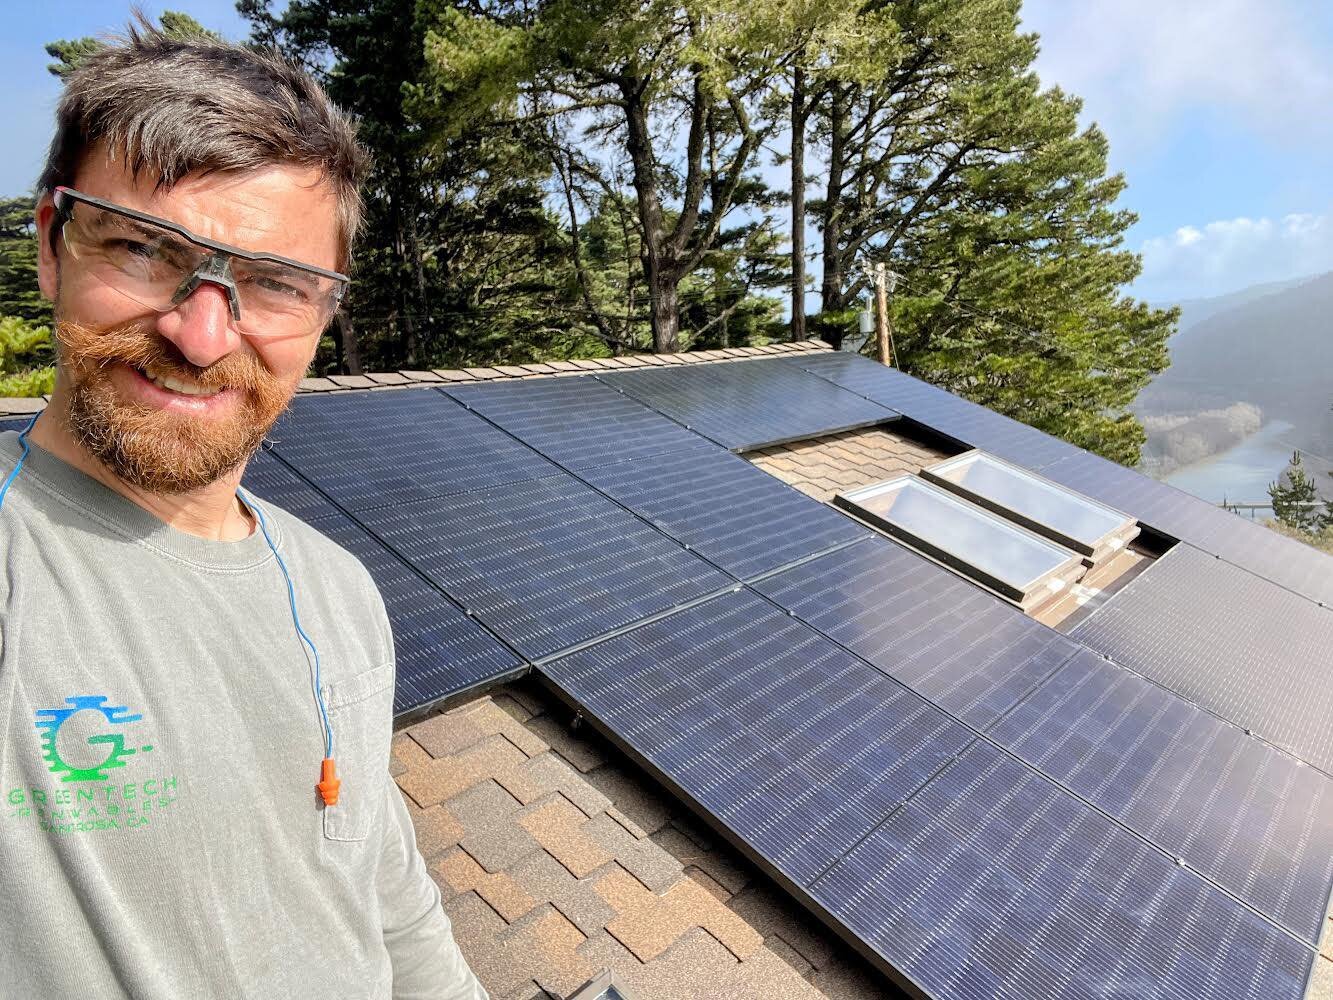 Meet our team! Up first, Jason Lord.

Jason Lord has been working for Mendocino Solar Service since June 2018.  It is his great pleasure to be the site surveyor, system designer and salesperson for MSS.  Jason has nearly nine years of experience in t